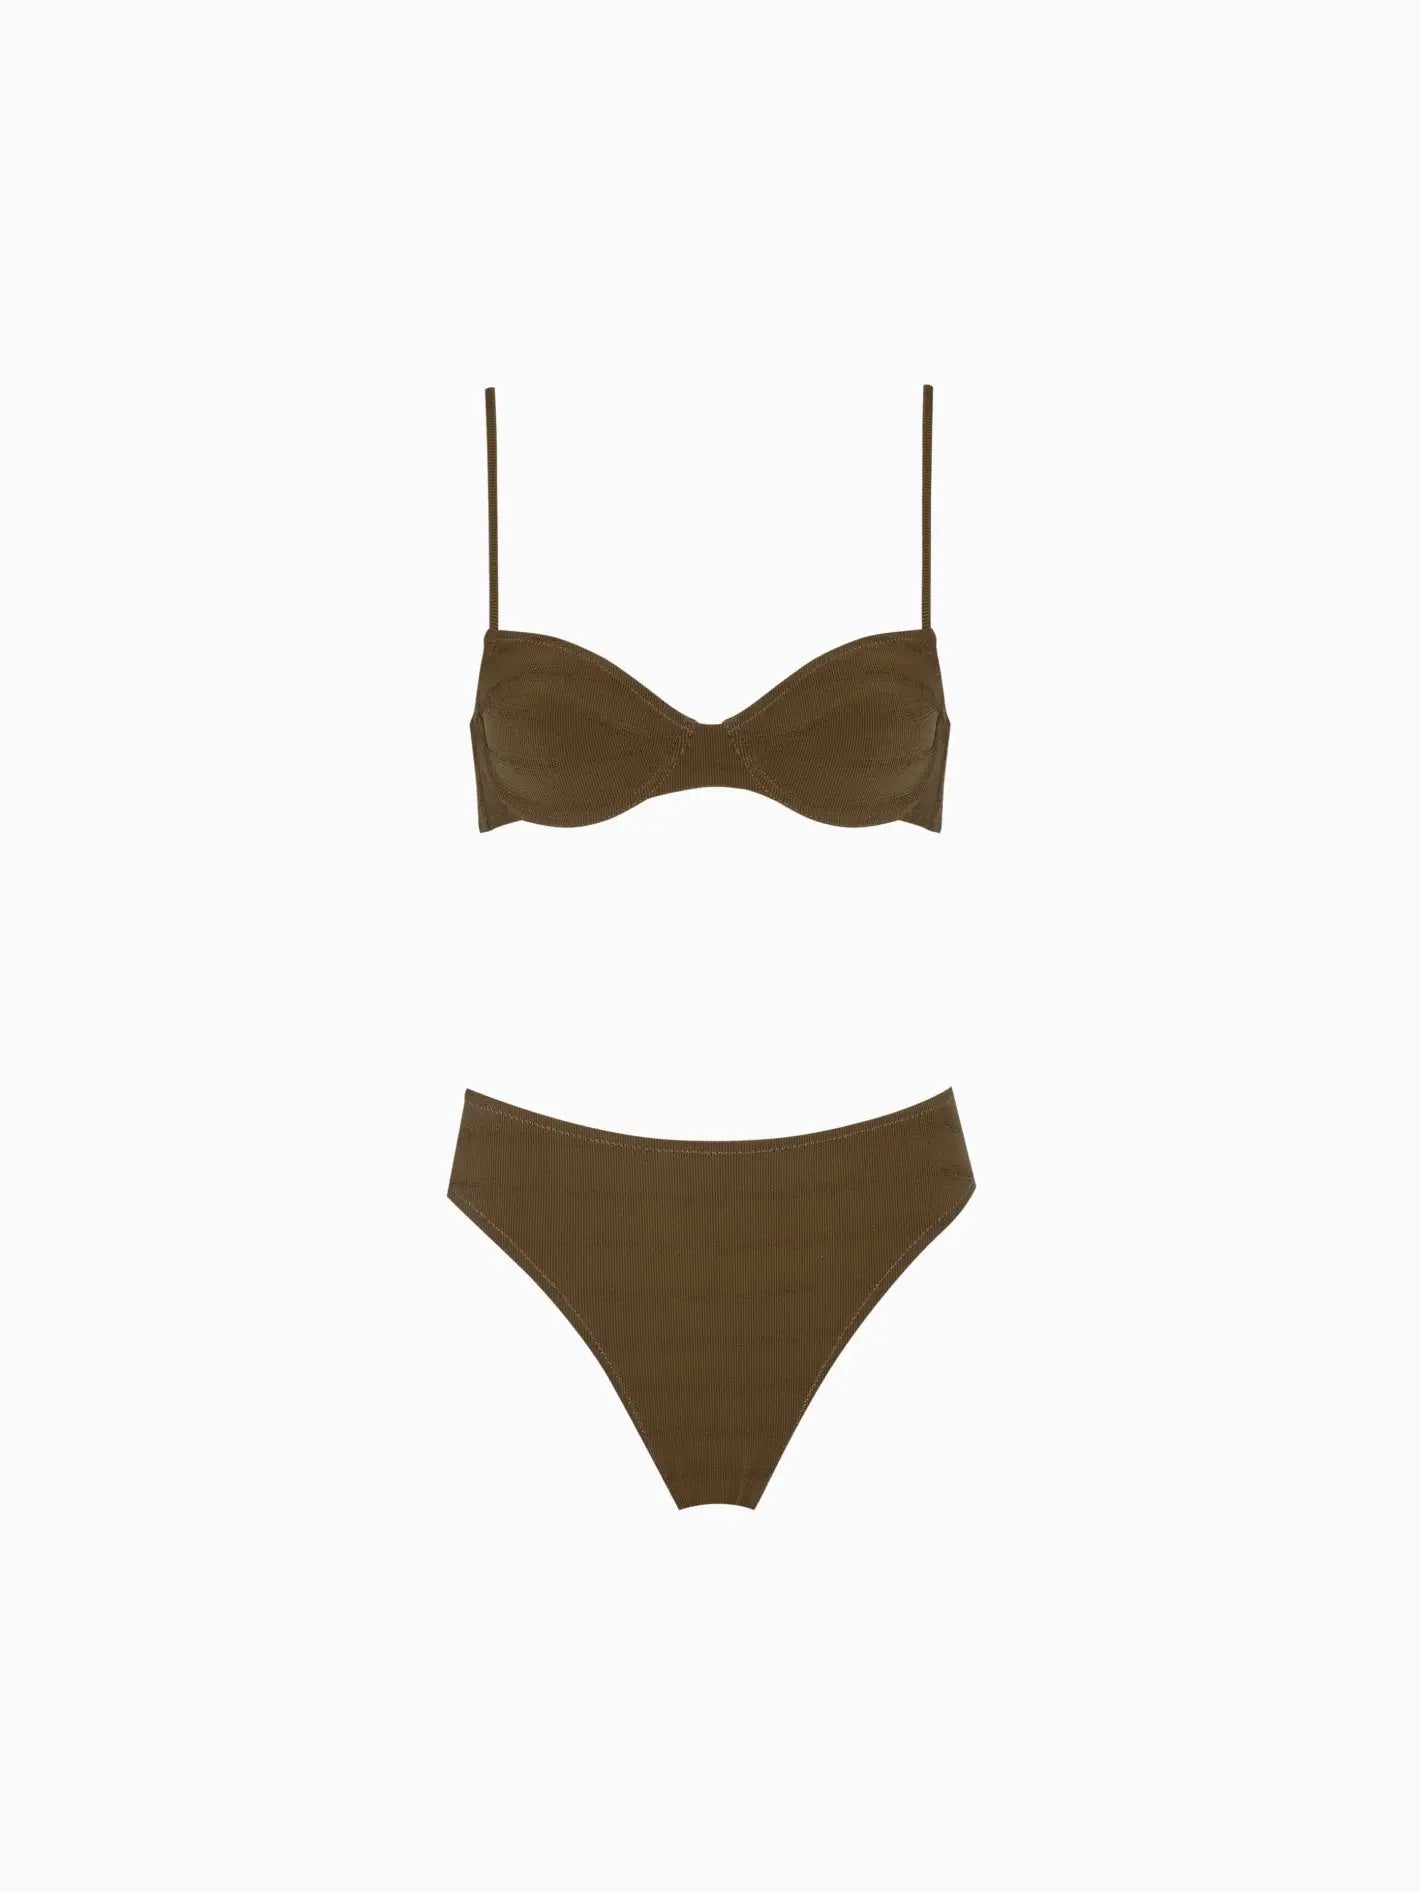 A two-piece brown bikini set from Bassalstore is displayed against a white background. The top features thin straps and a slight sweetheart neckline, while the bottom boasts a classic high-cut style. Discover this chic swimwear piece inspired by the vibrant flair of Barcelona. Replace it with the Pale Olimpia Bikini Khaki for an equally stylish option.